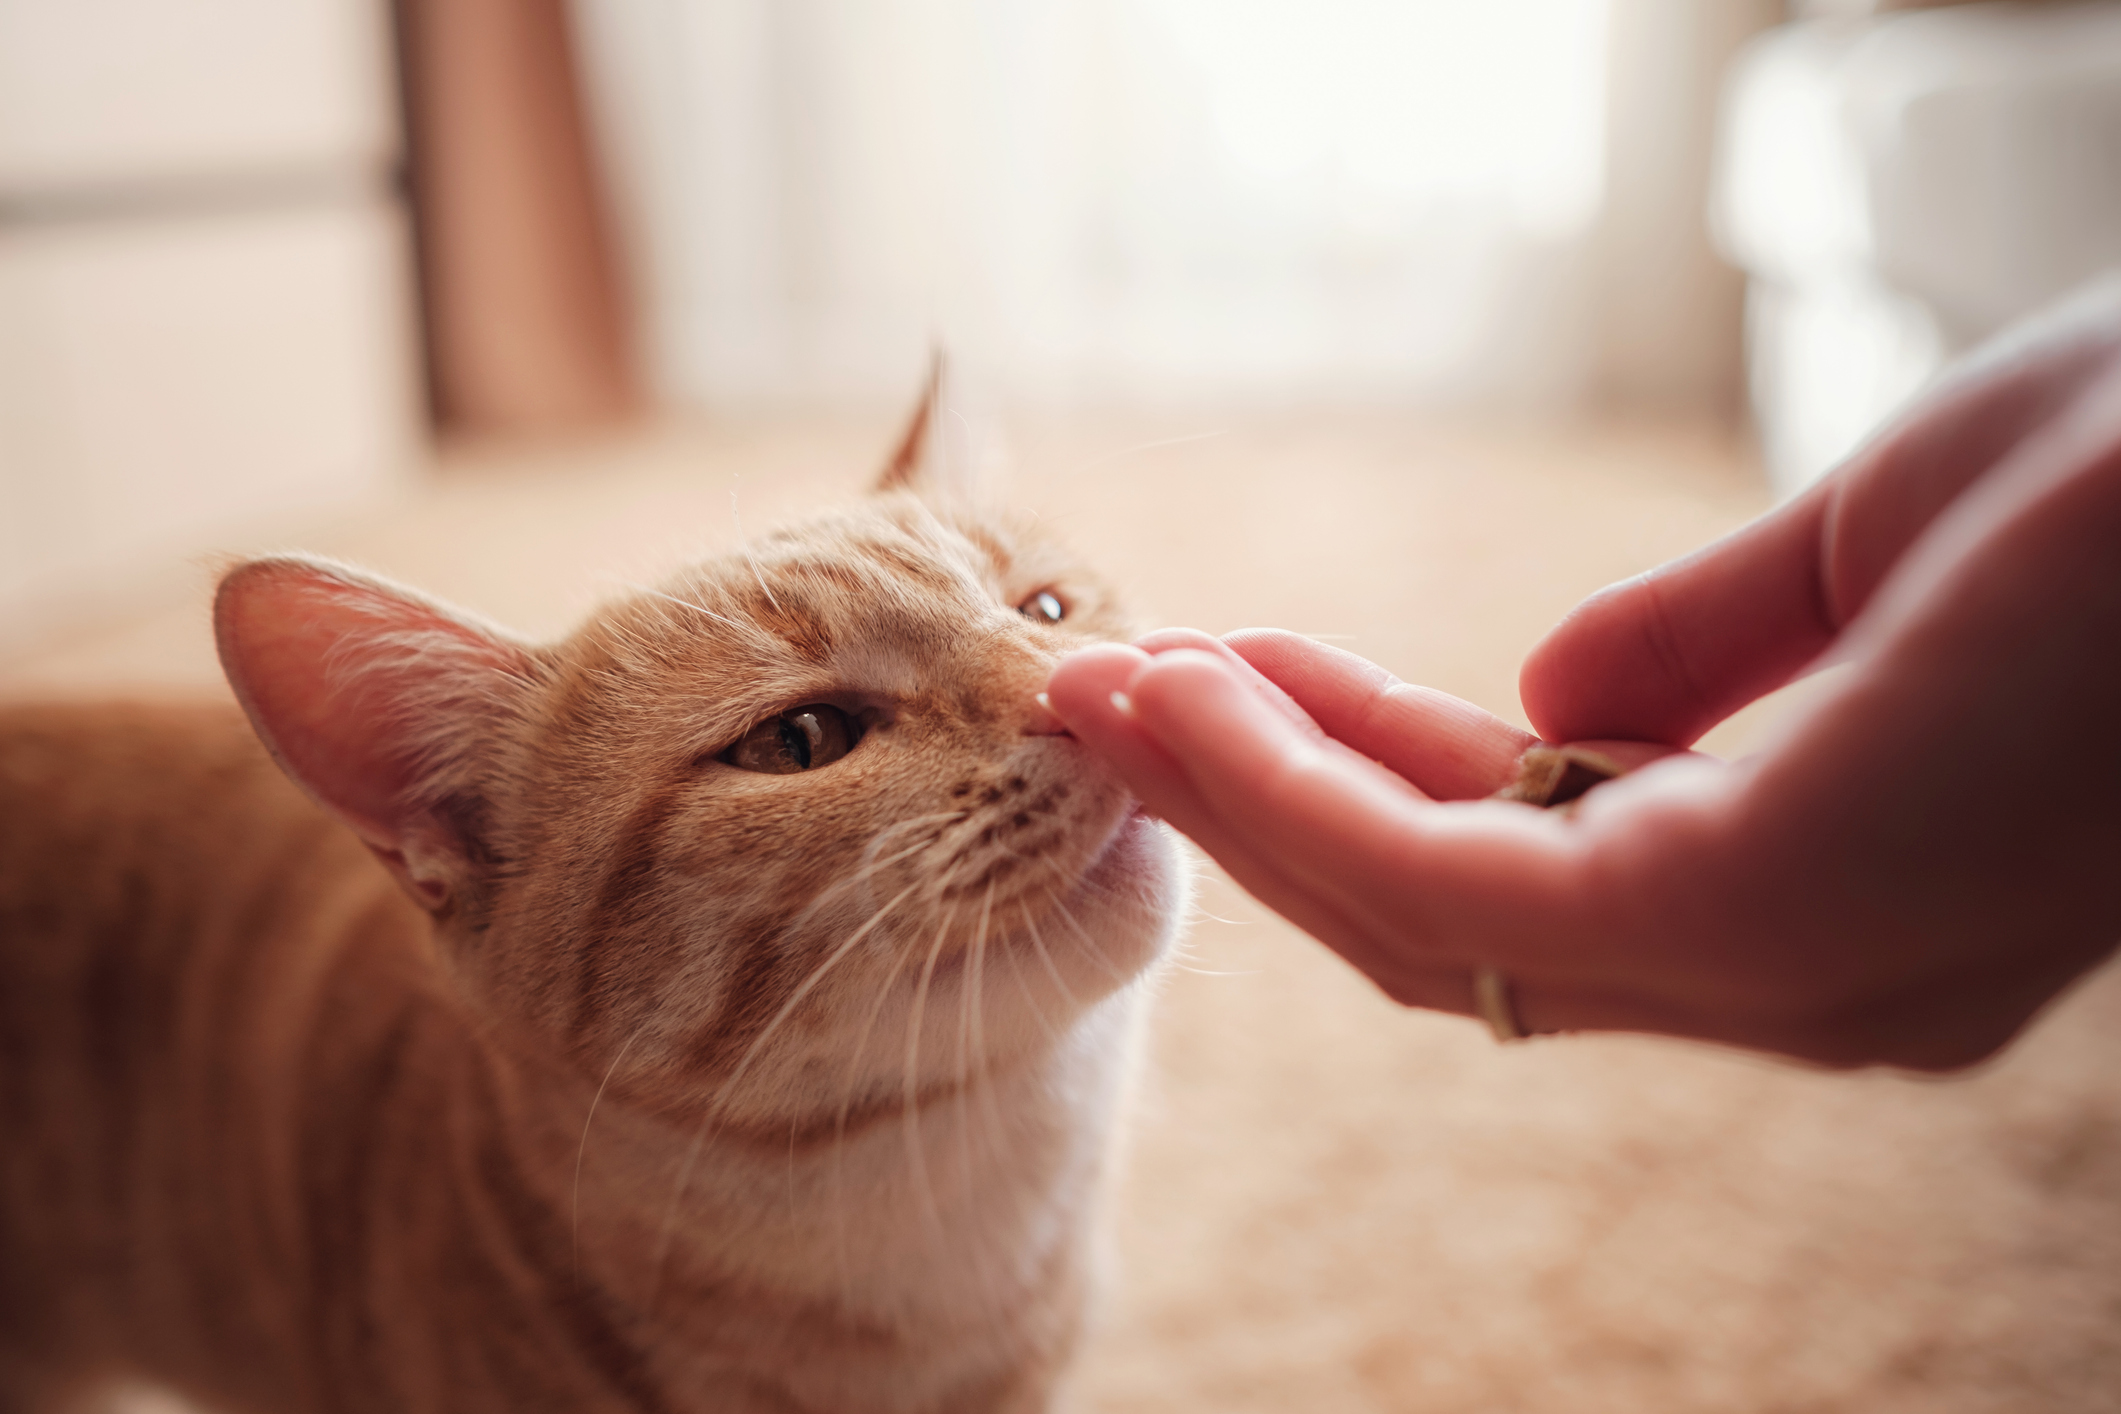  Closeup of person’s hand offering a treat to a curious ginger tabby